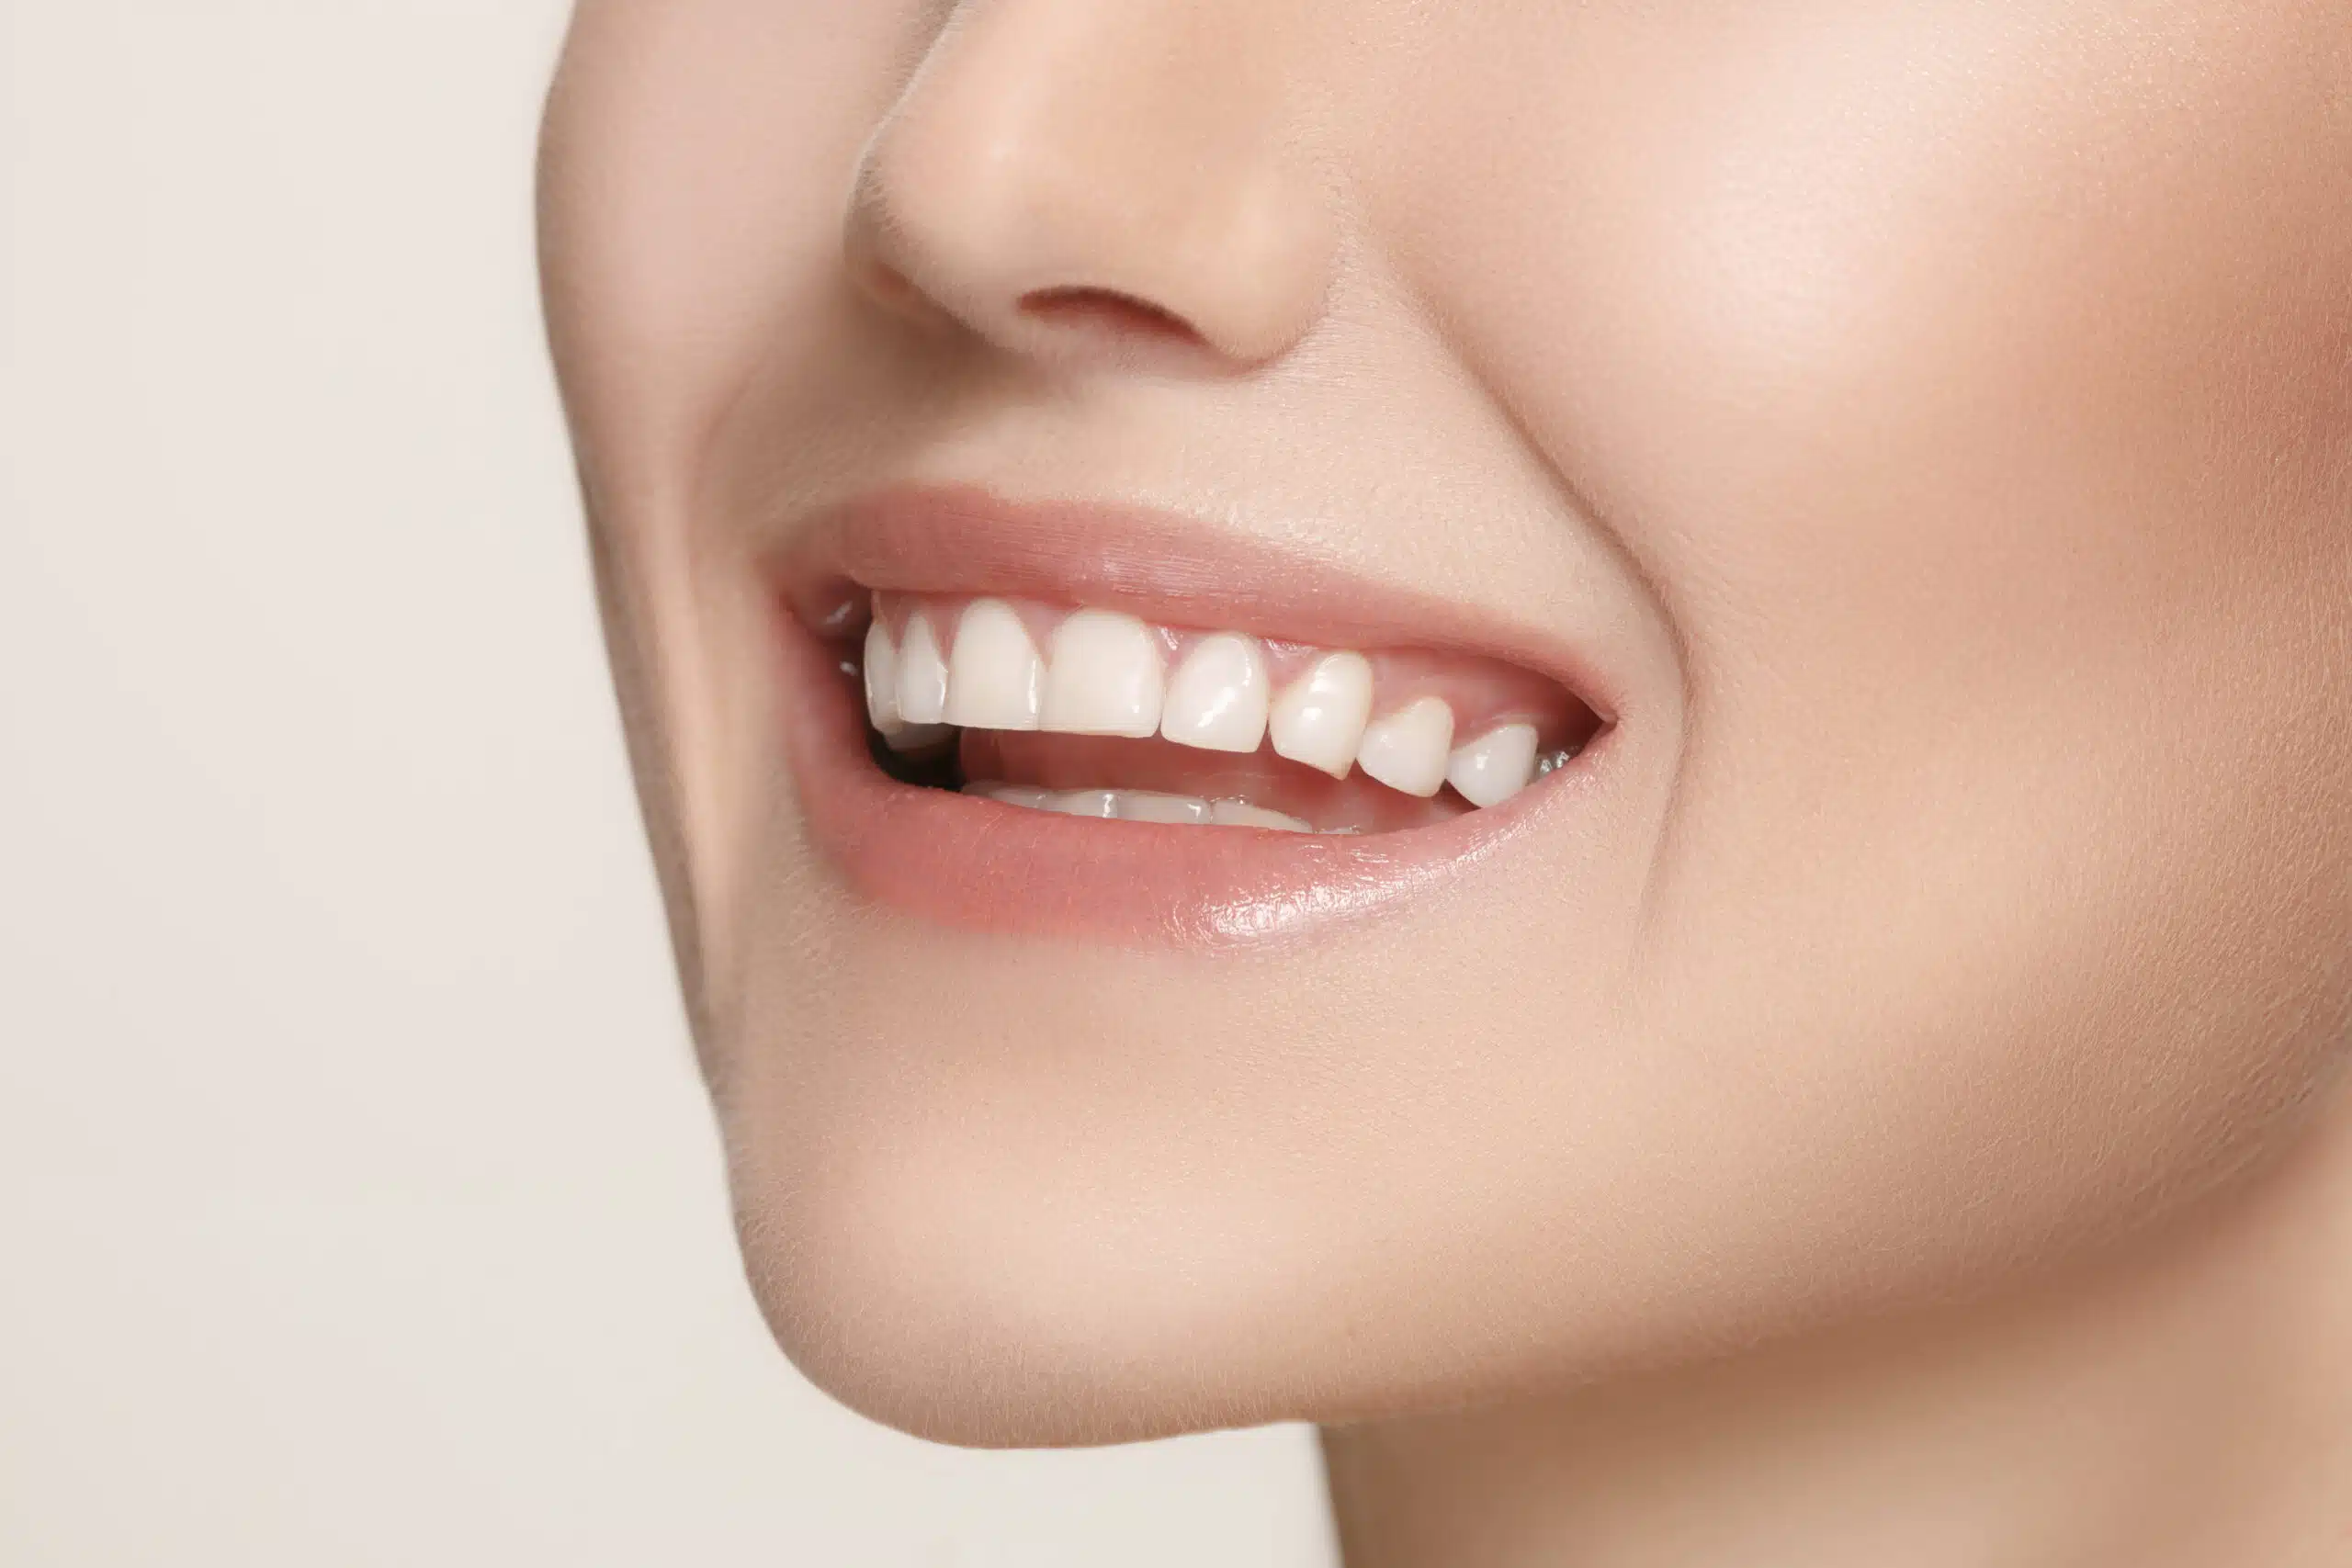 Cosmetic dentistry helps you achieve the perfect smile through a variety of aesthetic-focused treatments.